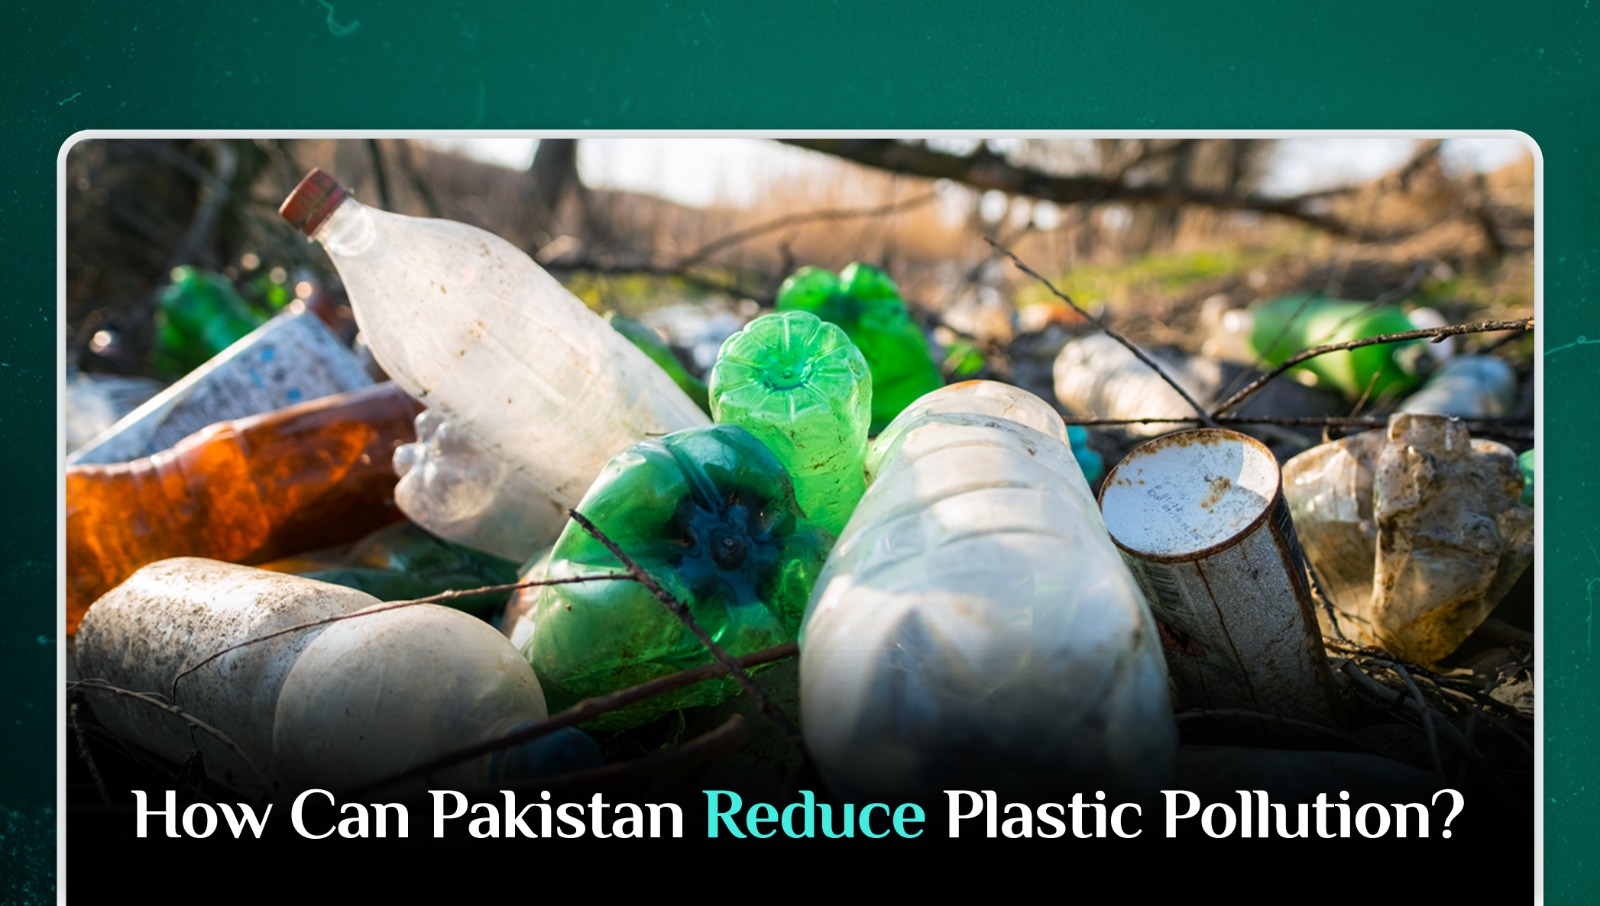 How can Pakistan Reduce Plastic Pollution?